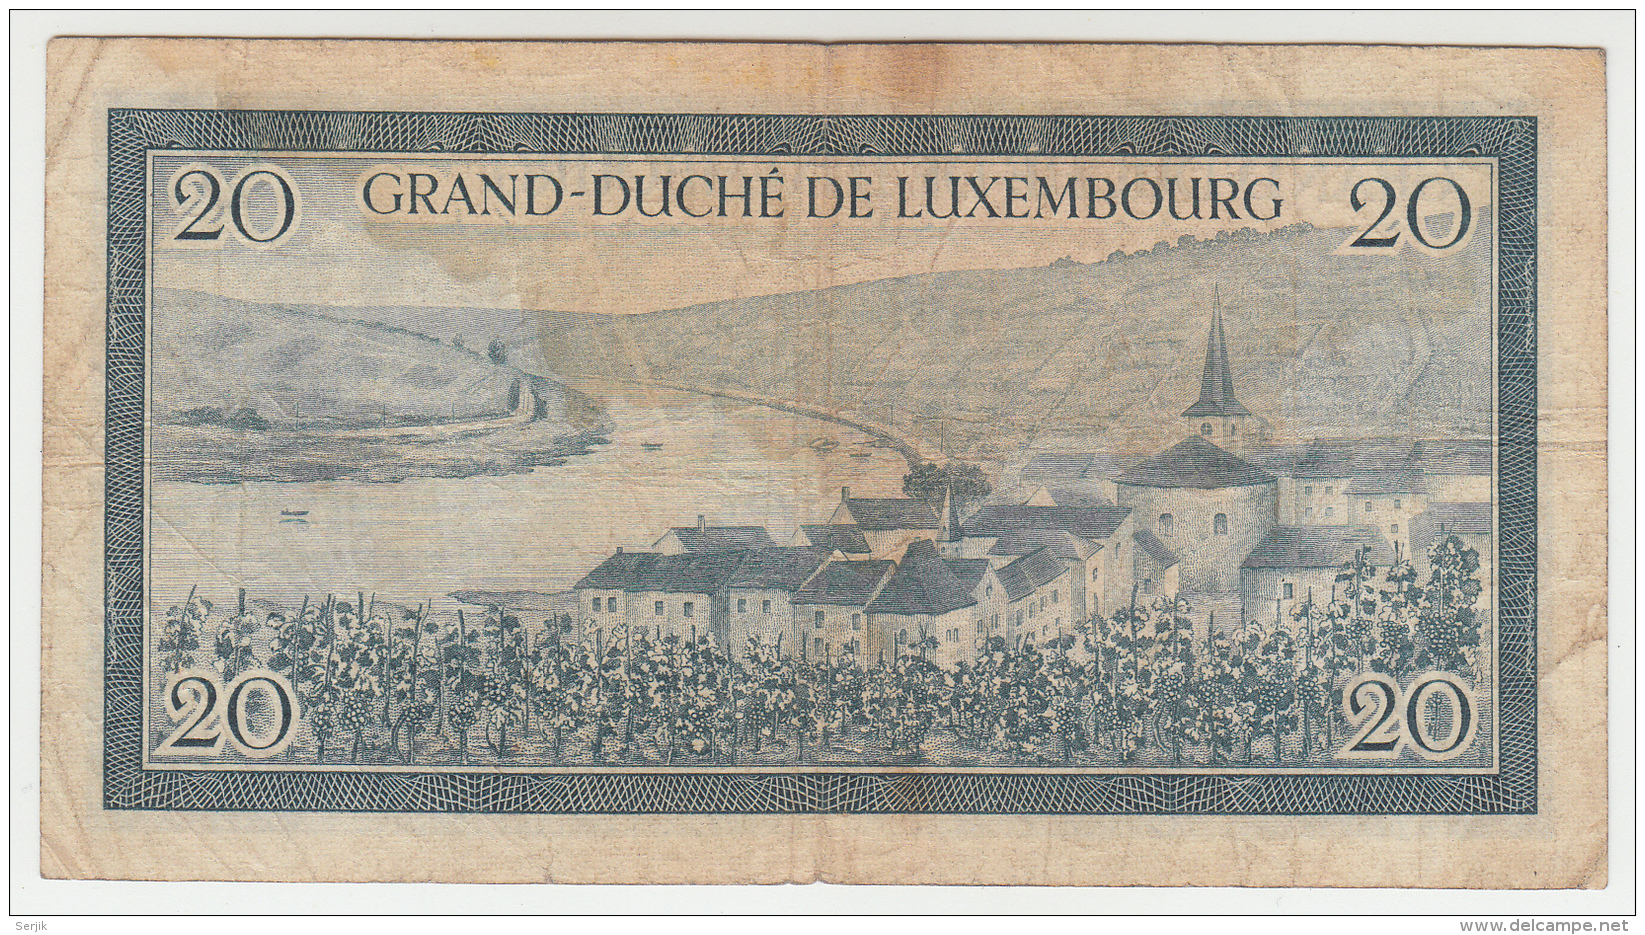 LUXEMBOURG 20 FRANCS 1955 VF Pick 49 - Luxembourg